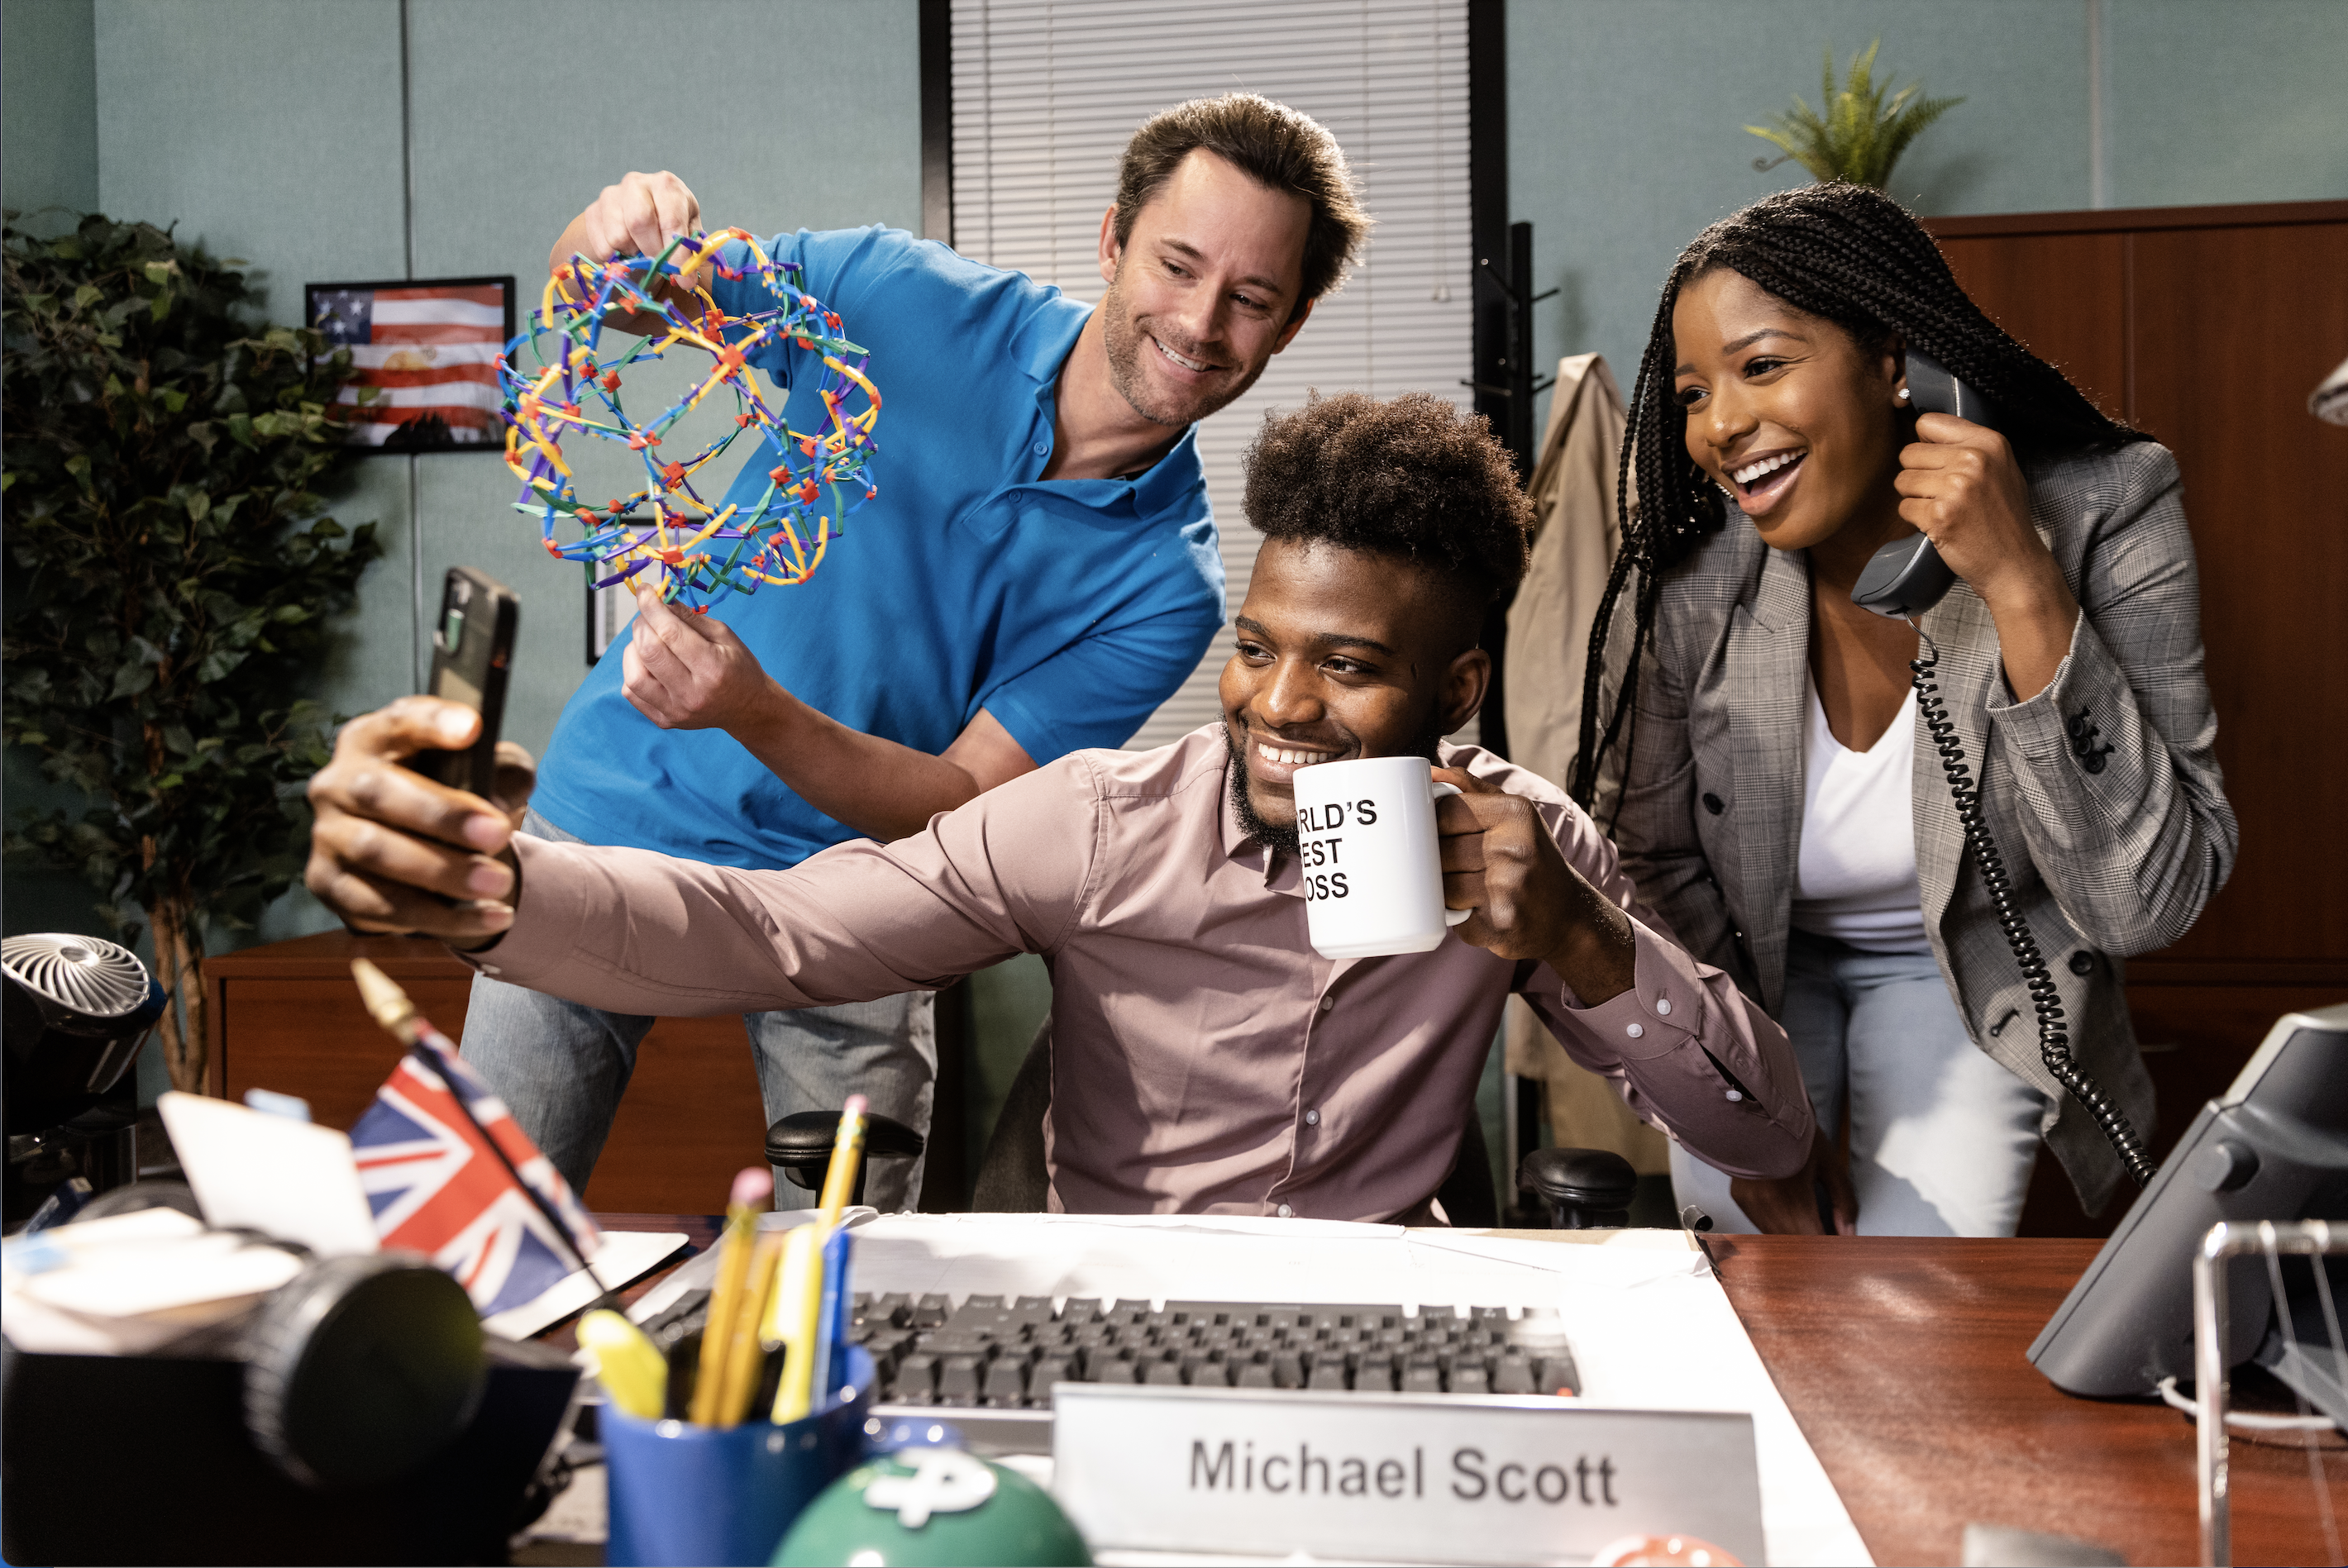 Take a look inside of “The Office Experience” pop-up in Chicago